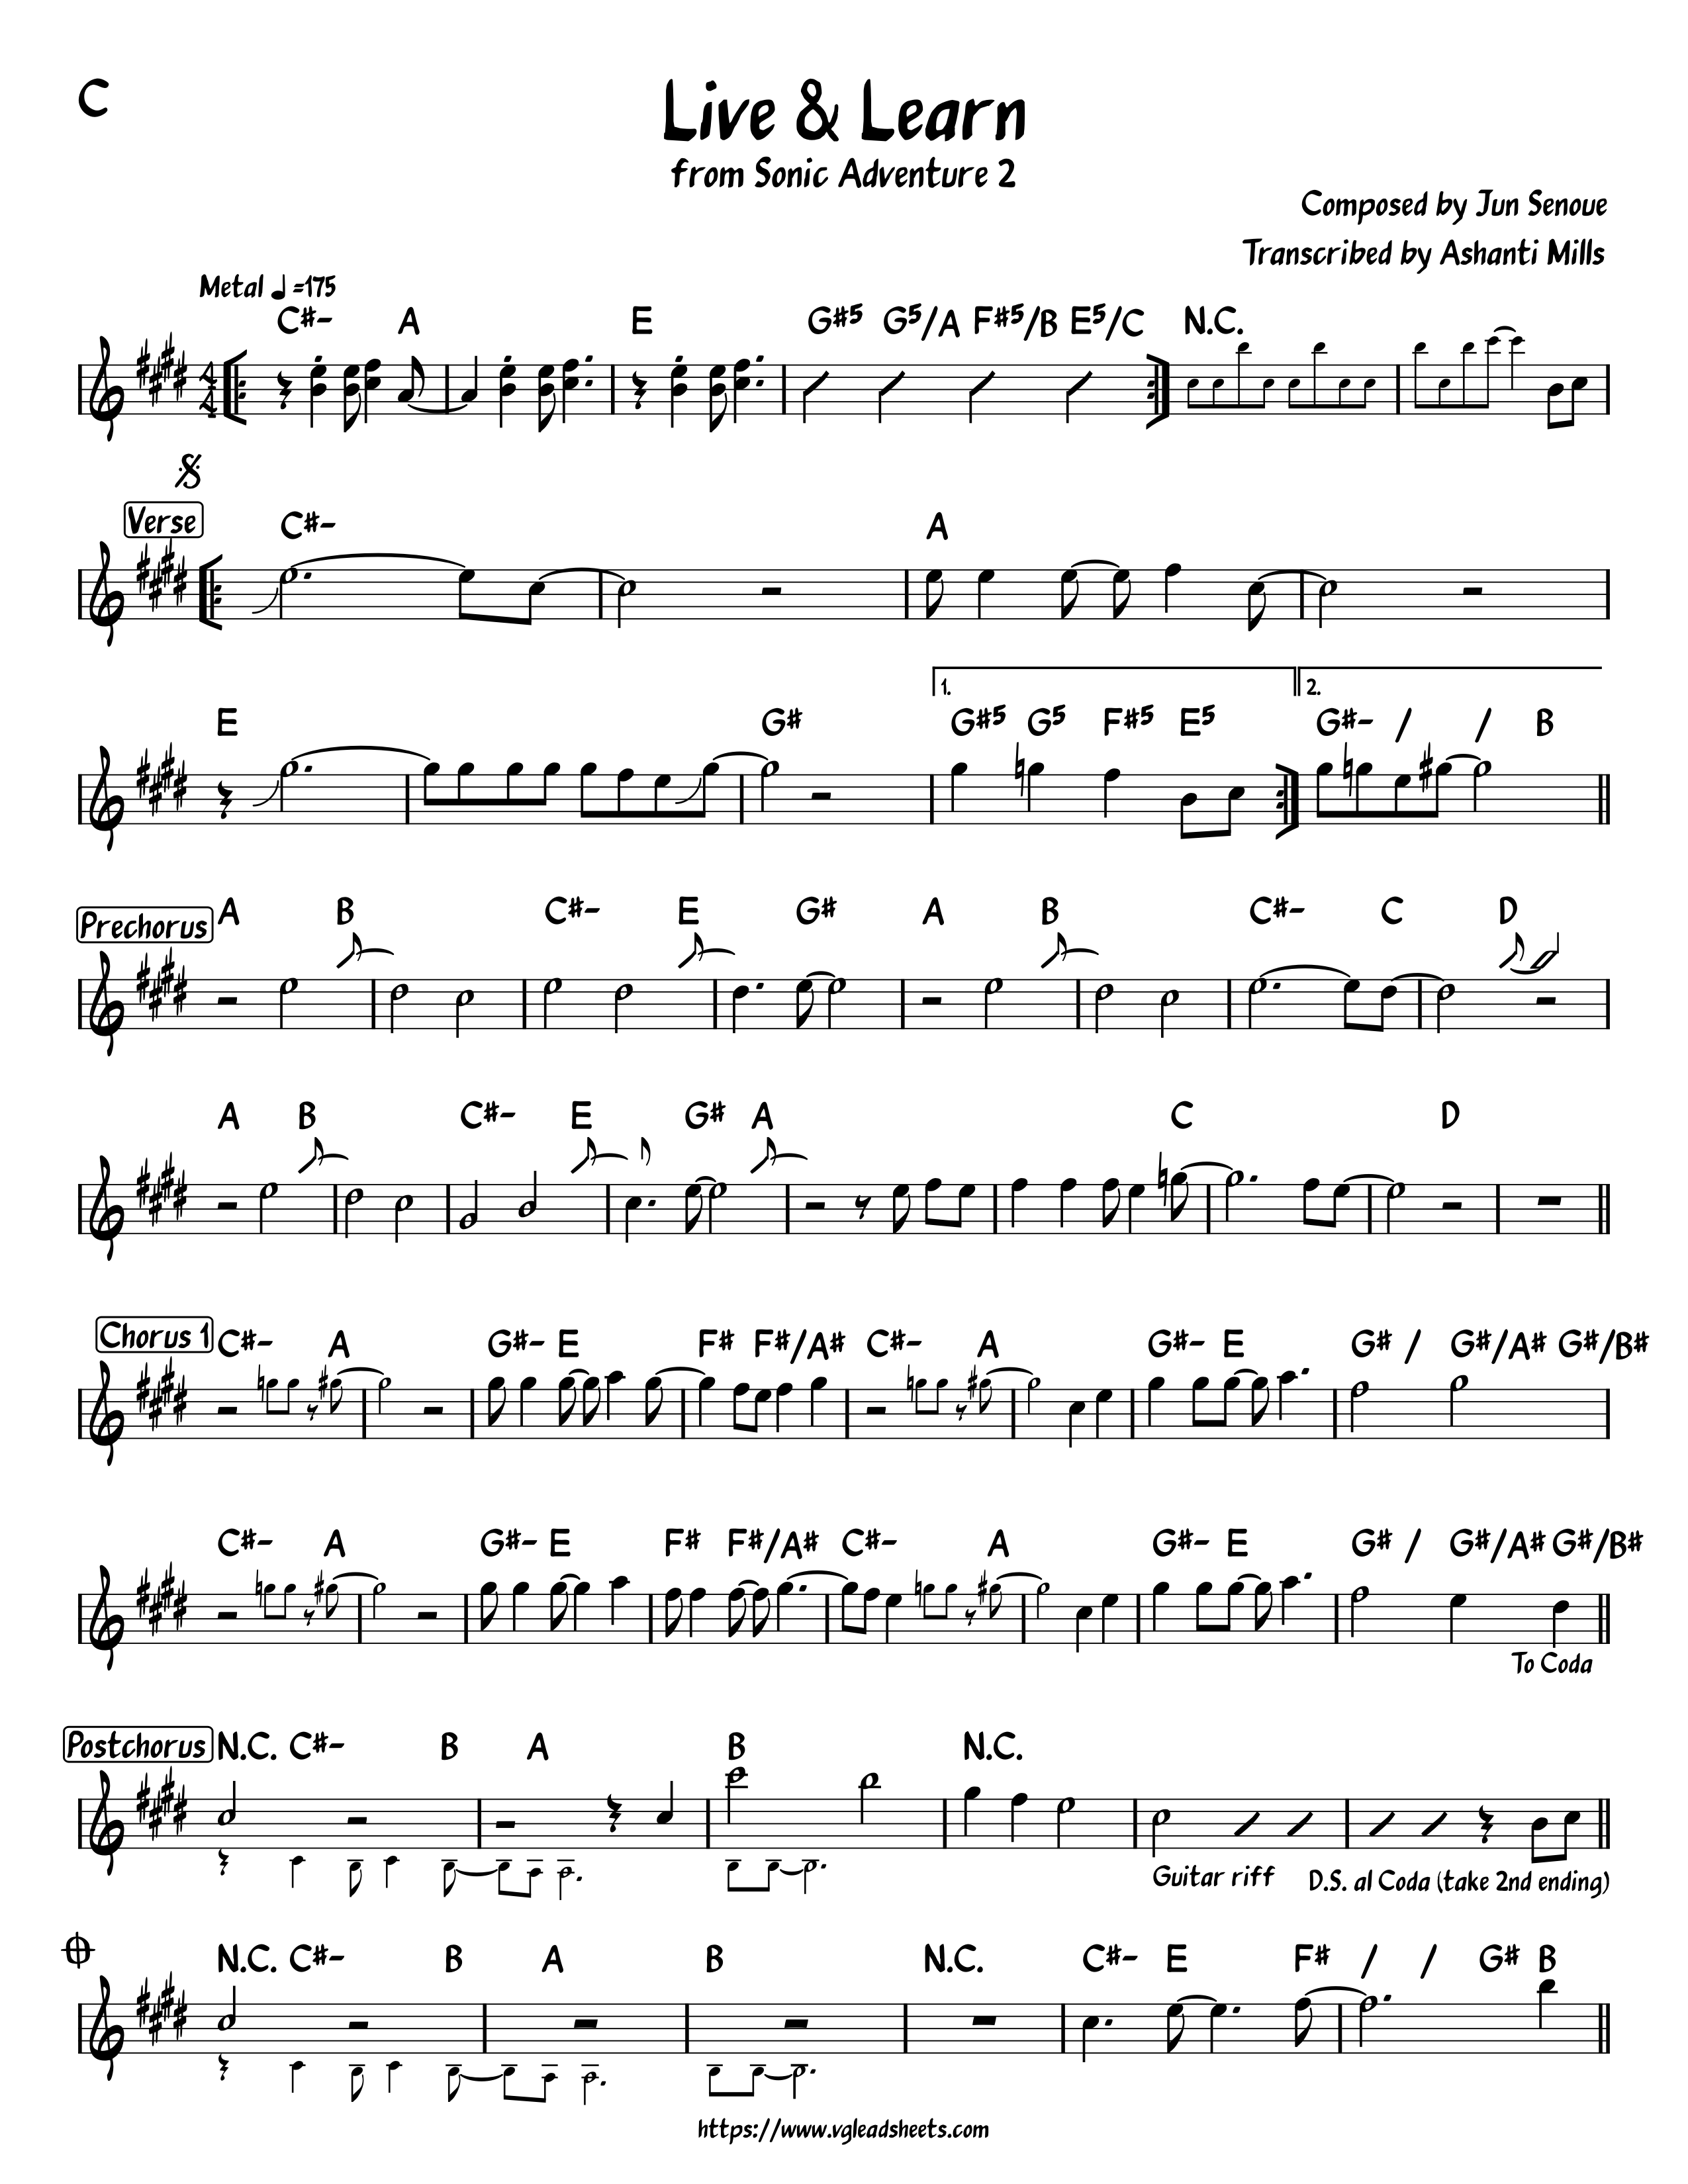 Green Hill Zone (Sonic the Hedgehog) for piano. Sheet music and midi files  for piano.